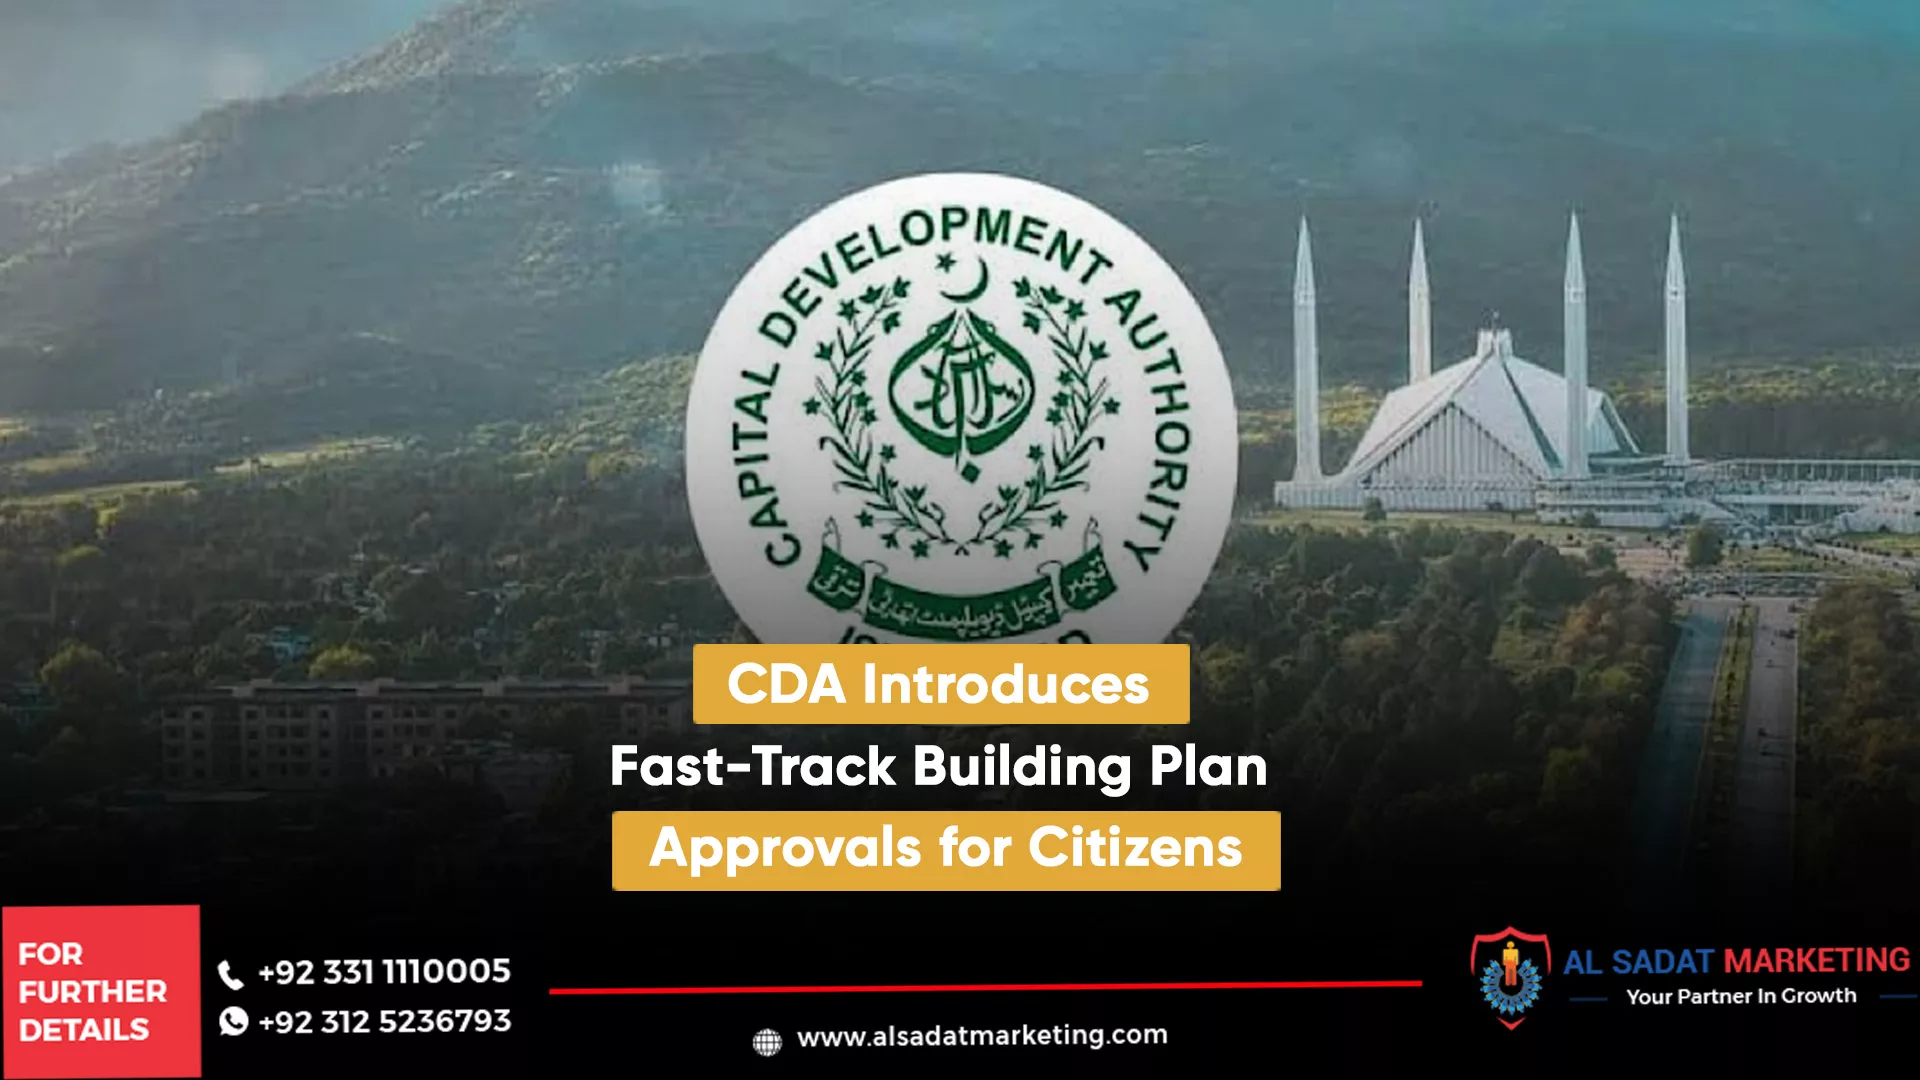 cda introduces fast-track building plan approvals for citizens, al sadat marketing, real estate agency in blue area islamabad